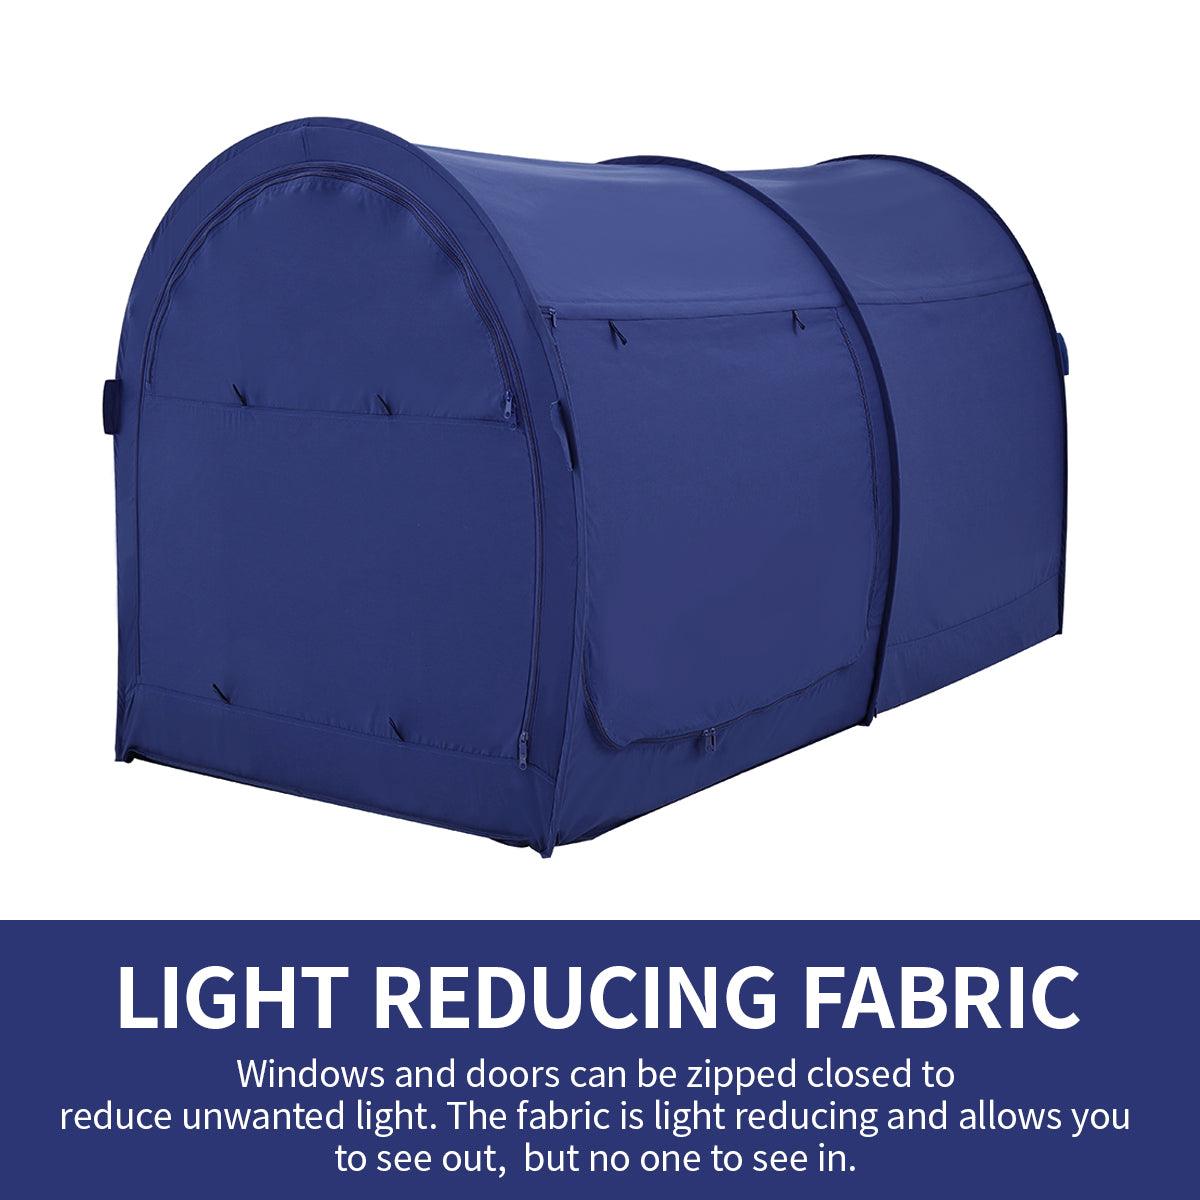 Alvantor Blackout Bed Tent Canopy, Best Gift for People Who Work Night Shifts - Alvantor